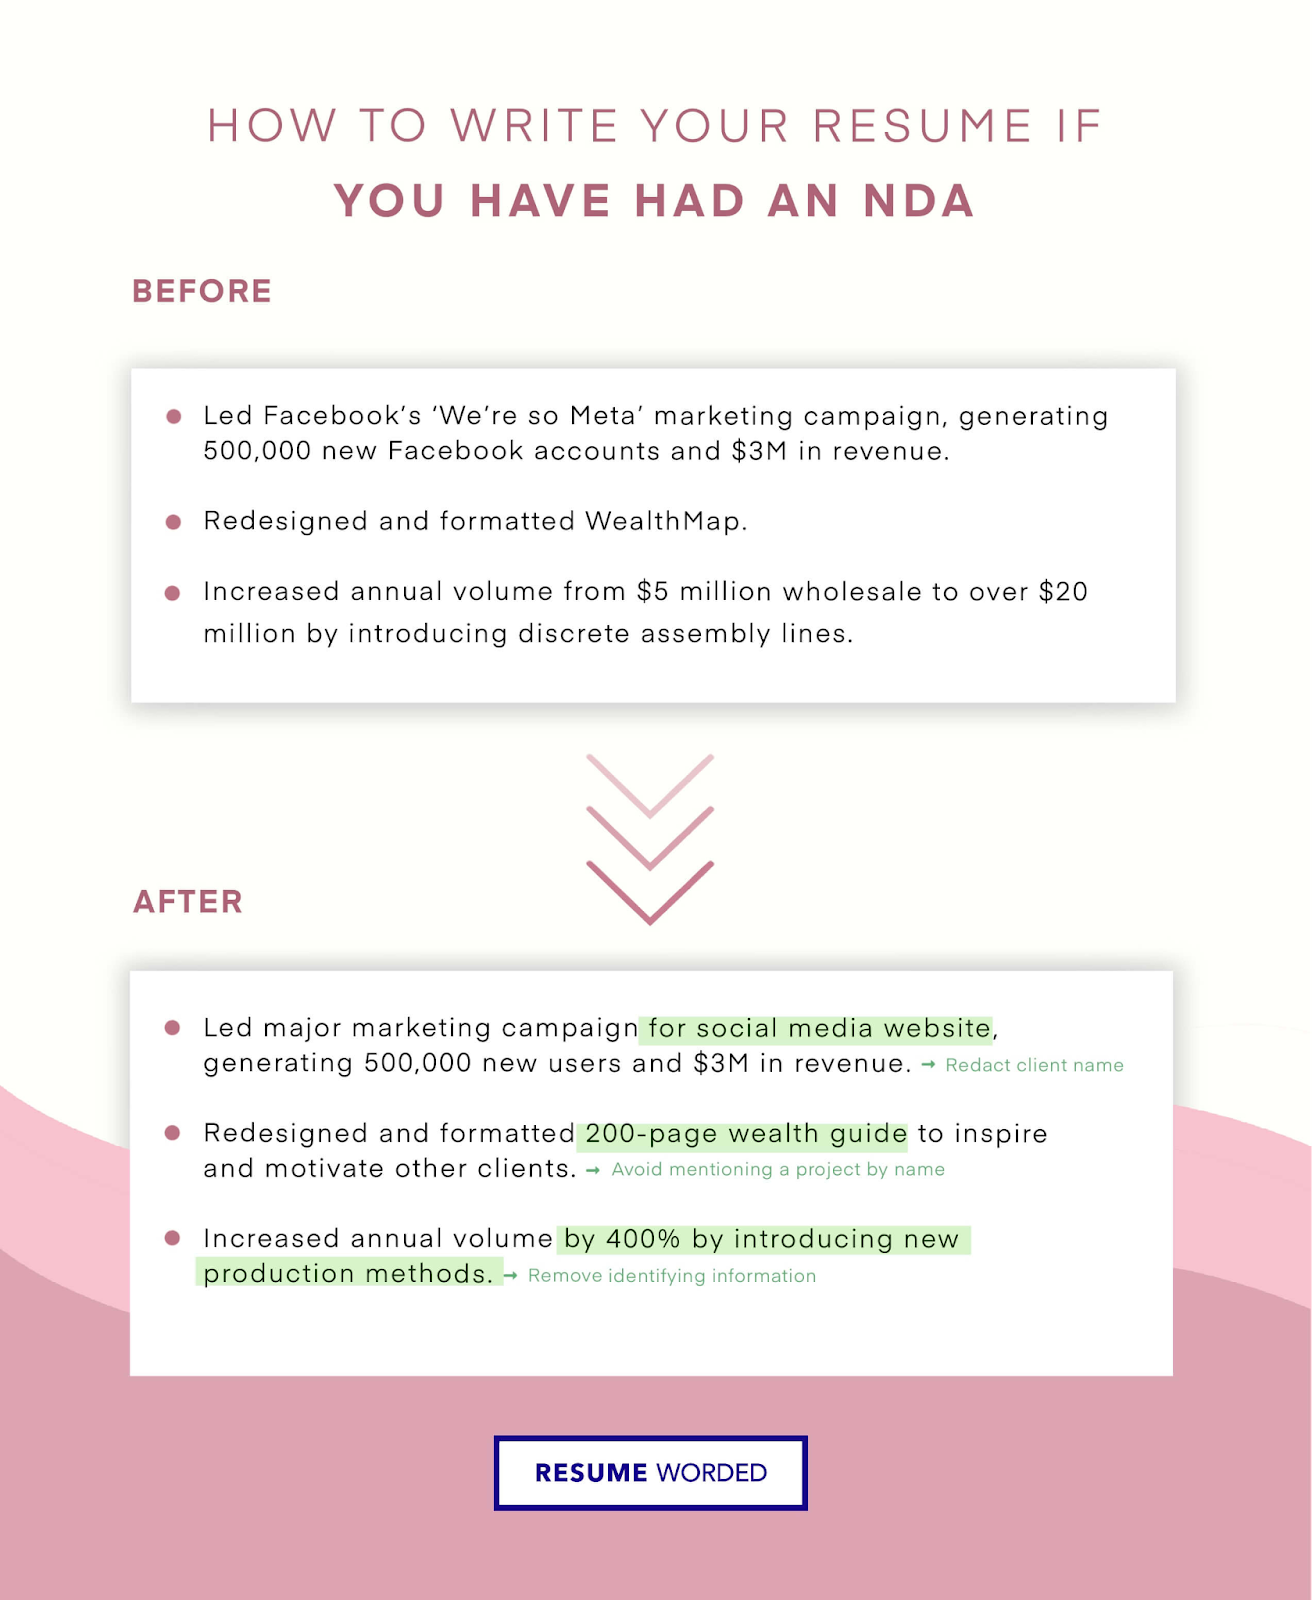 How to write your resume if you have an NDA